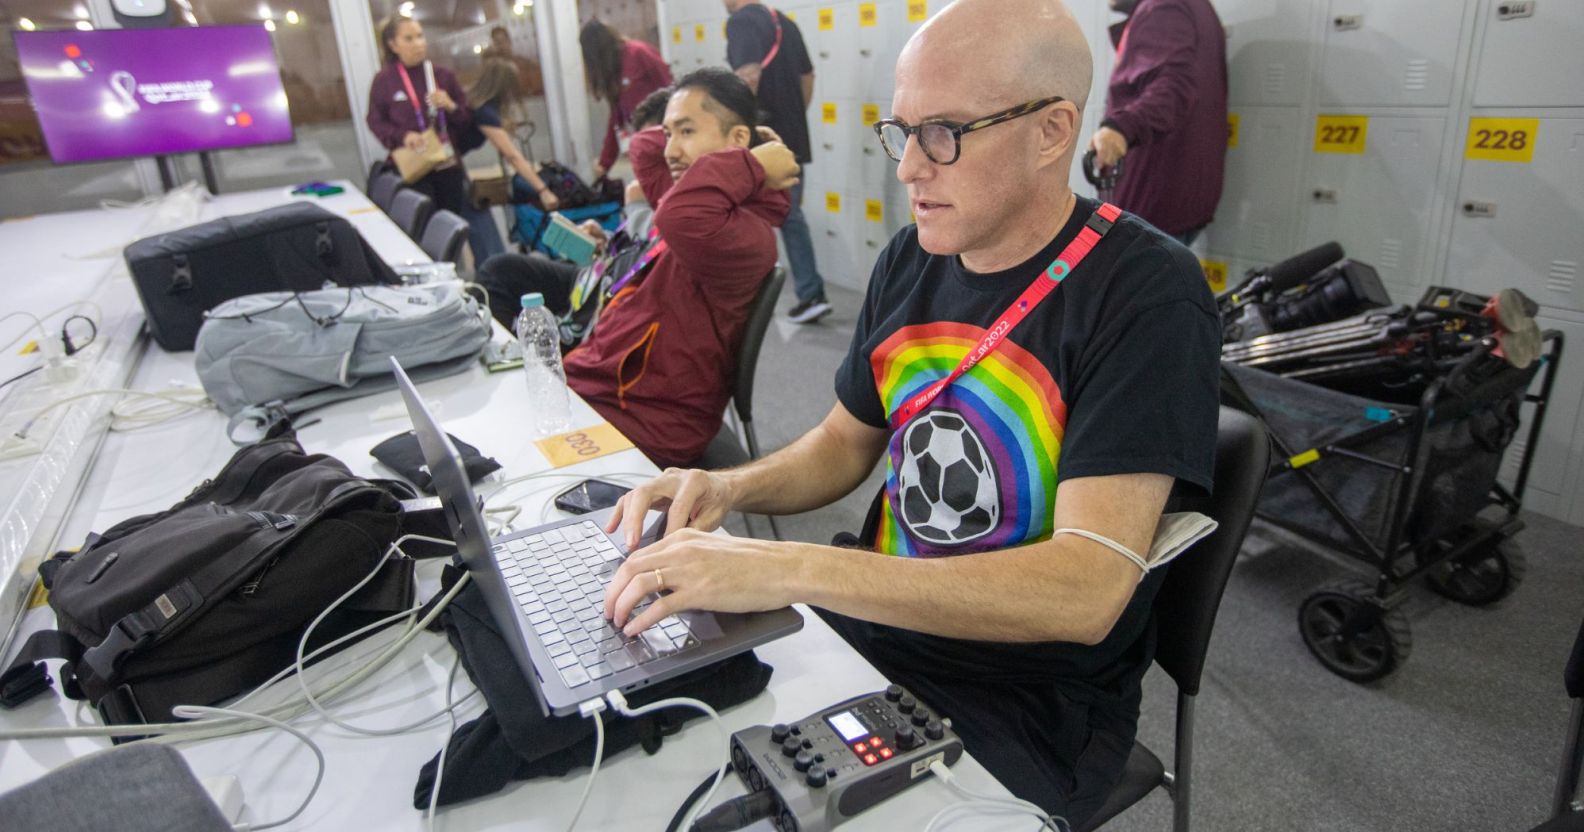 Sports journalist Grant Wahl typing on a laptop in the spacious media center of the Qatar World Cup.